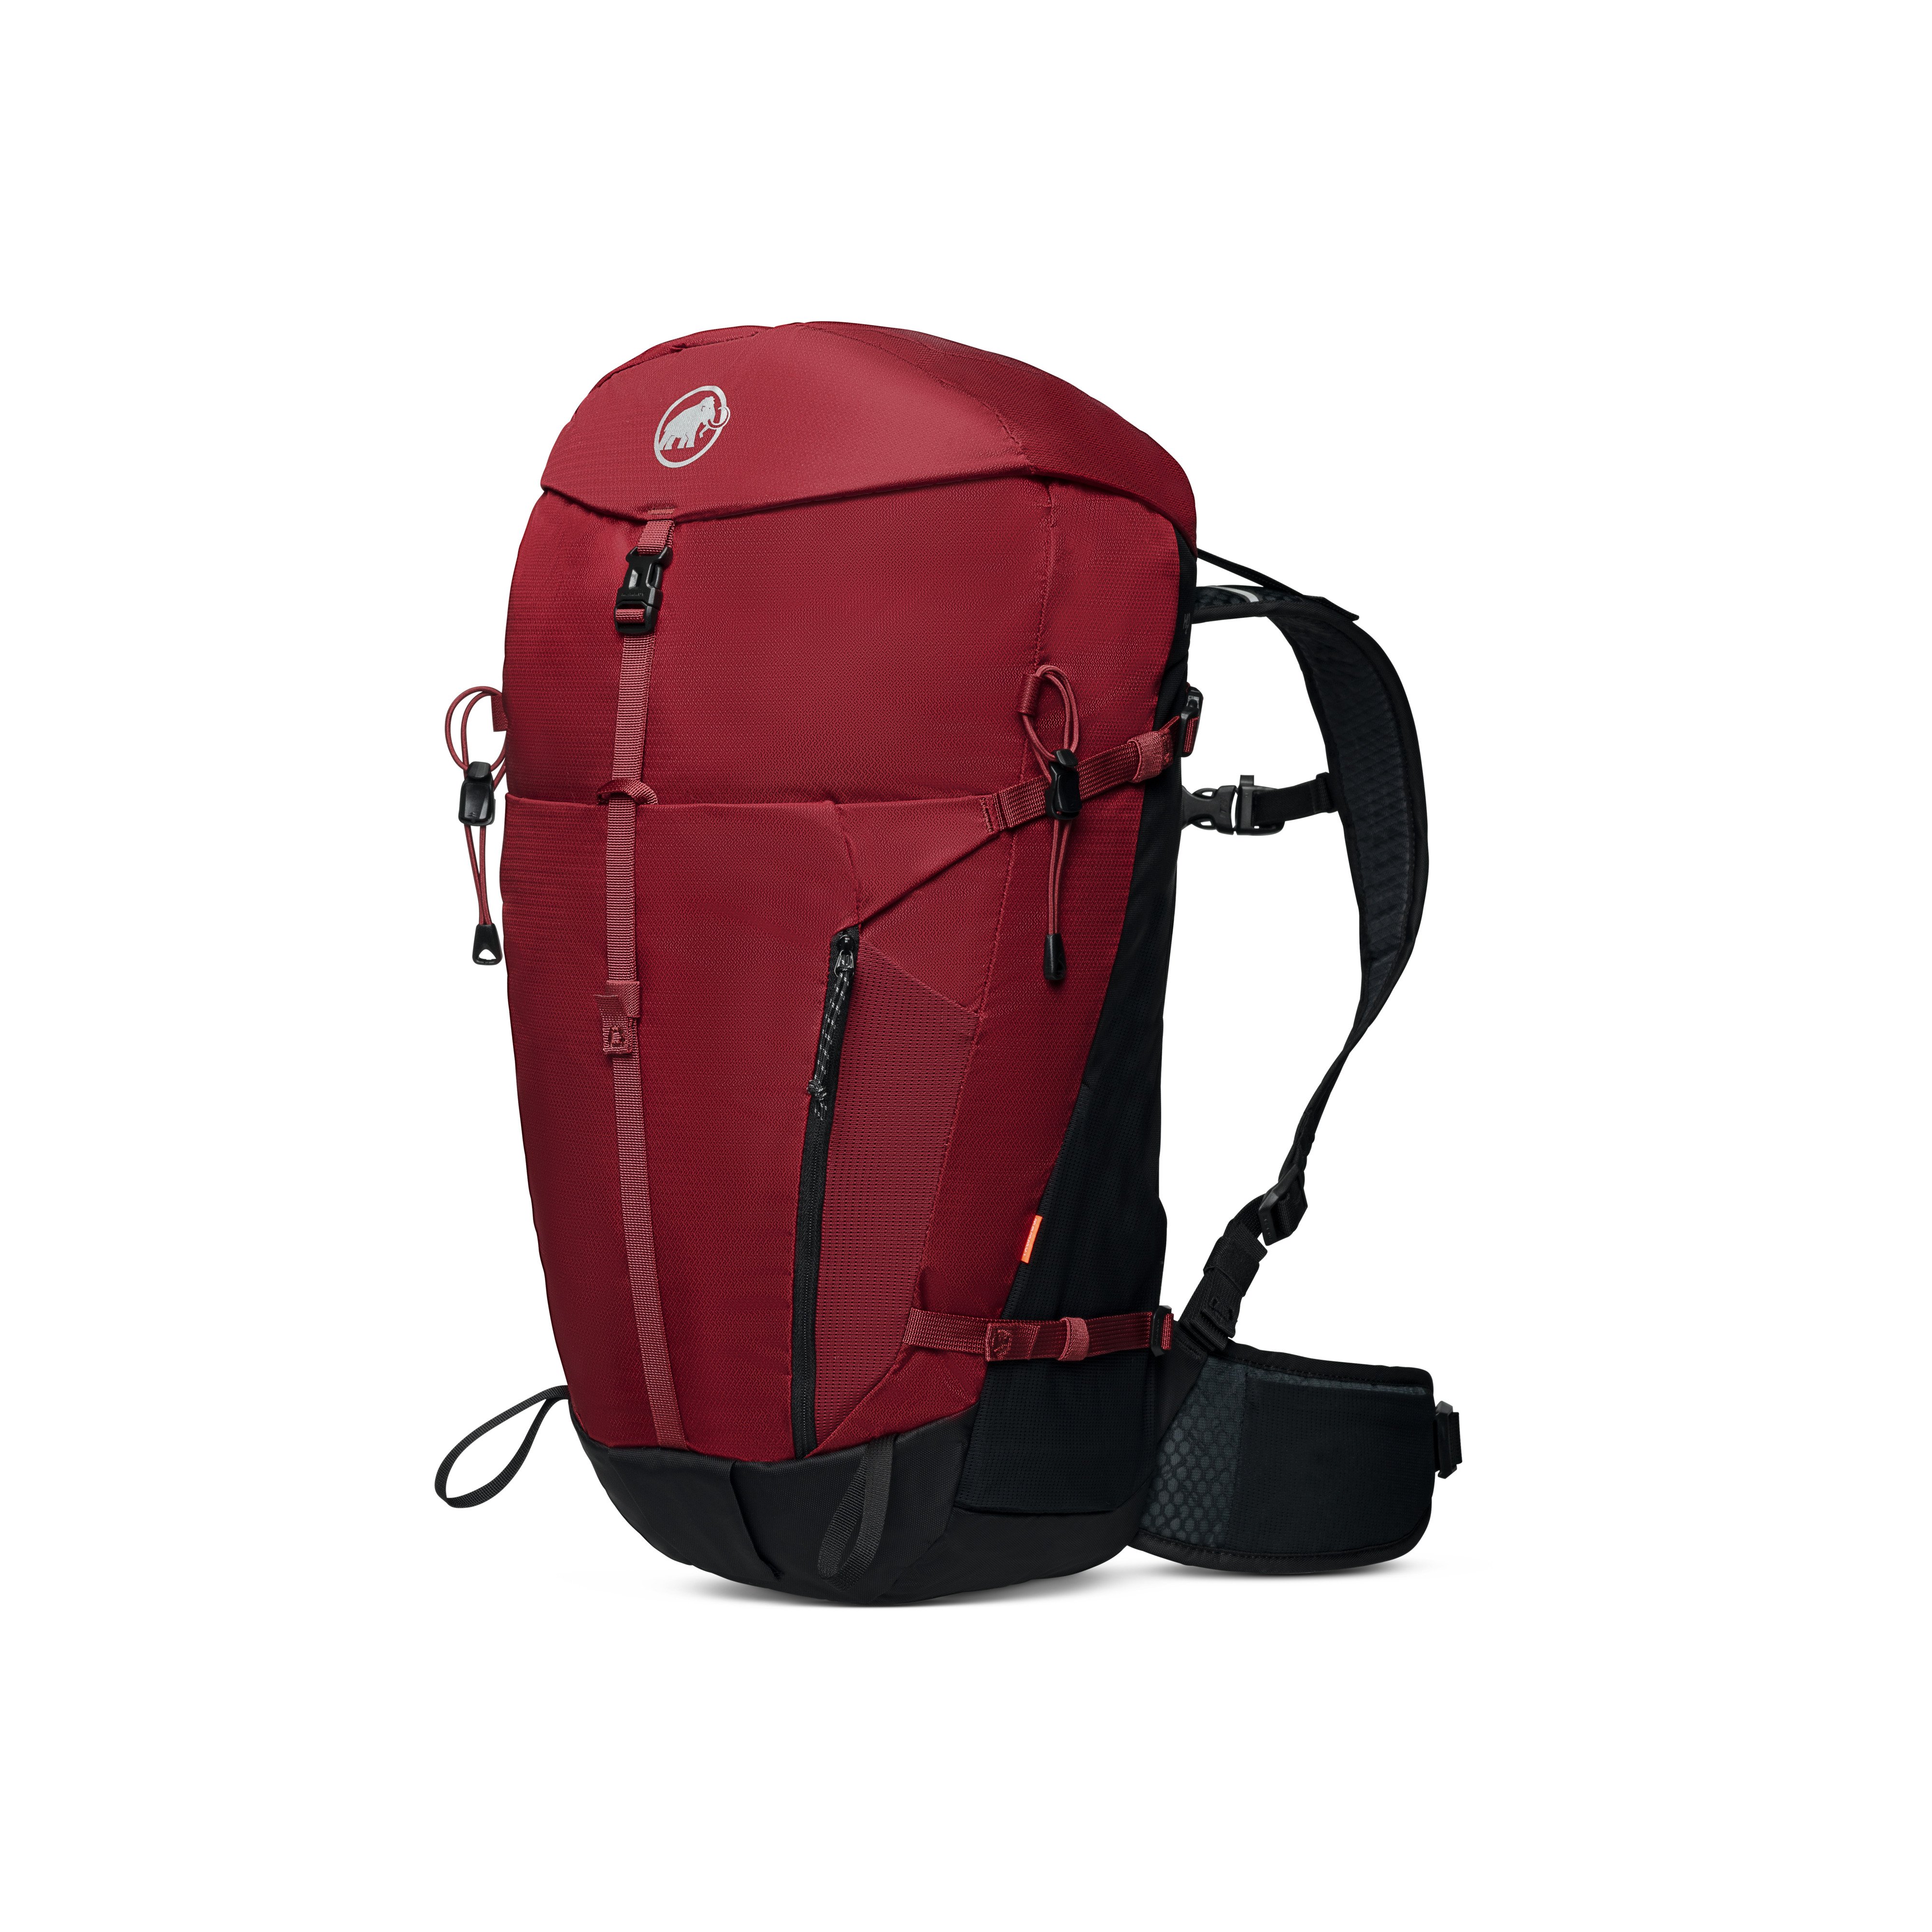 Lithium 30 Women - blood red-black, 30 L product image